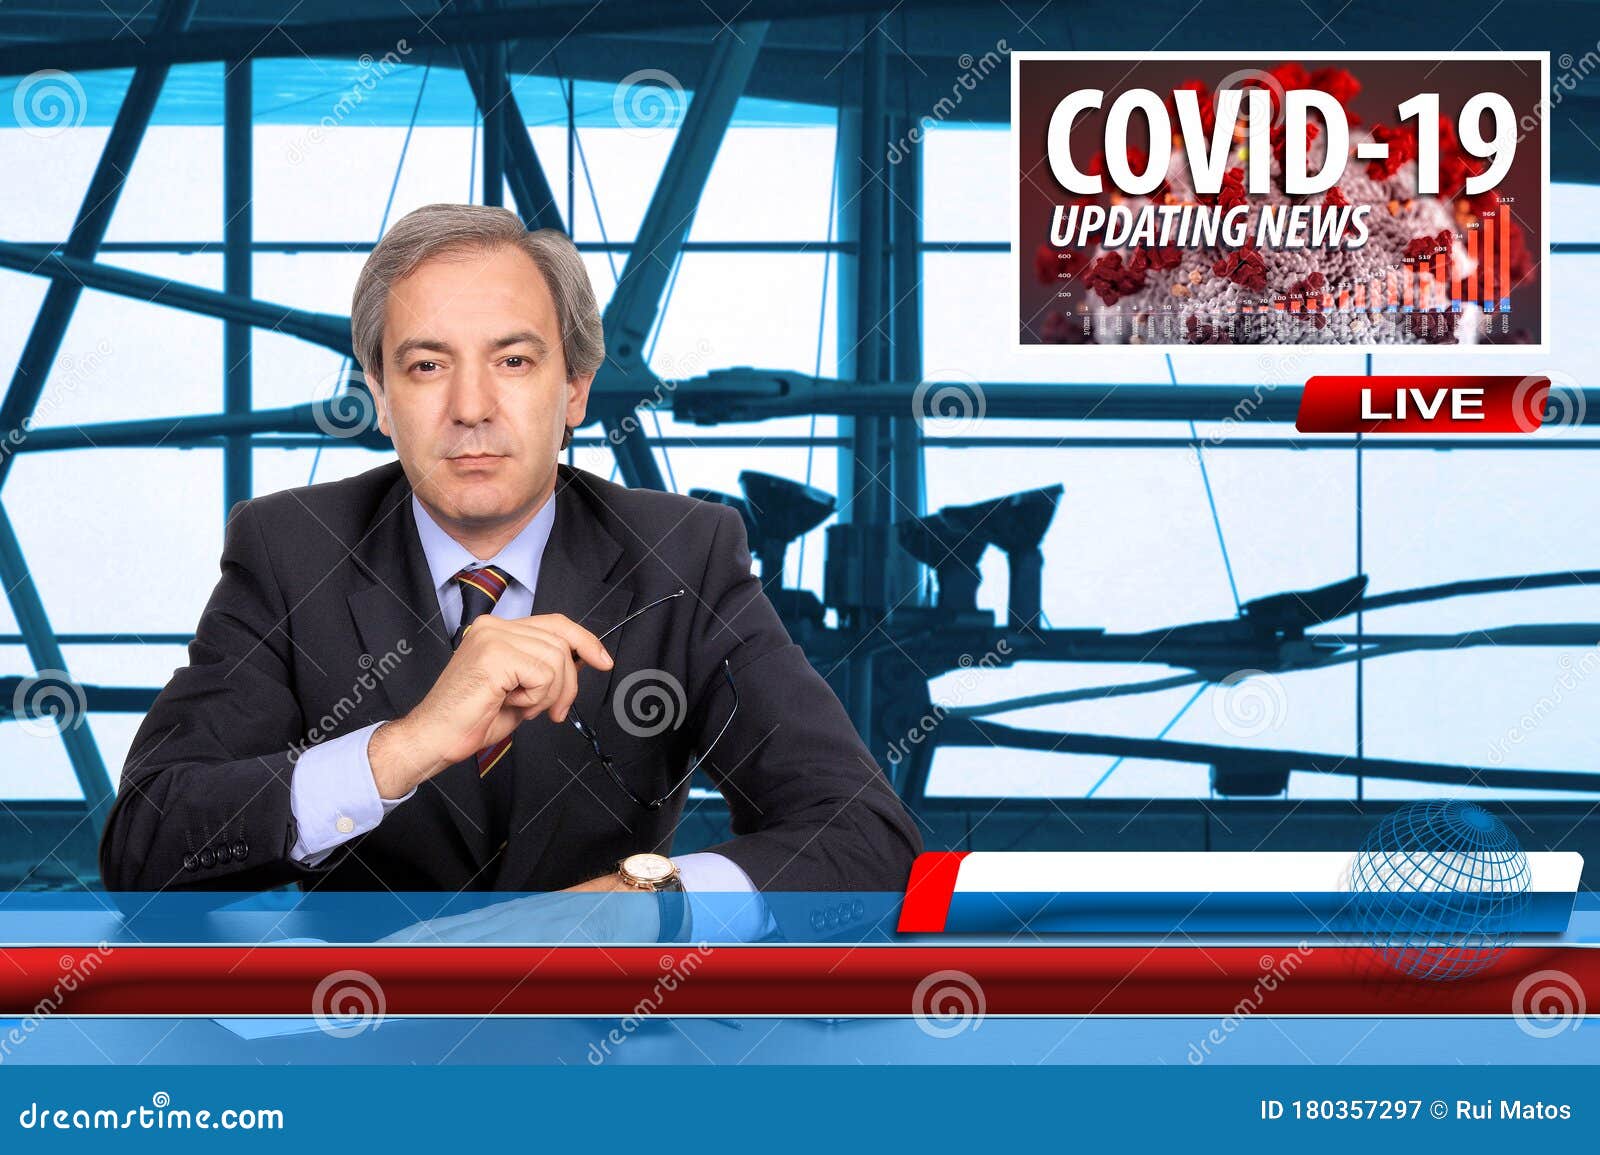 tv news screen with male anchorman reporting latest news on the novel pandemic coronavirus covid-19